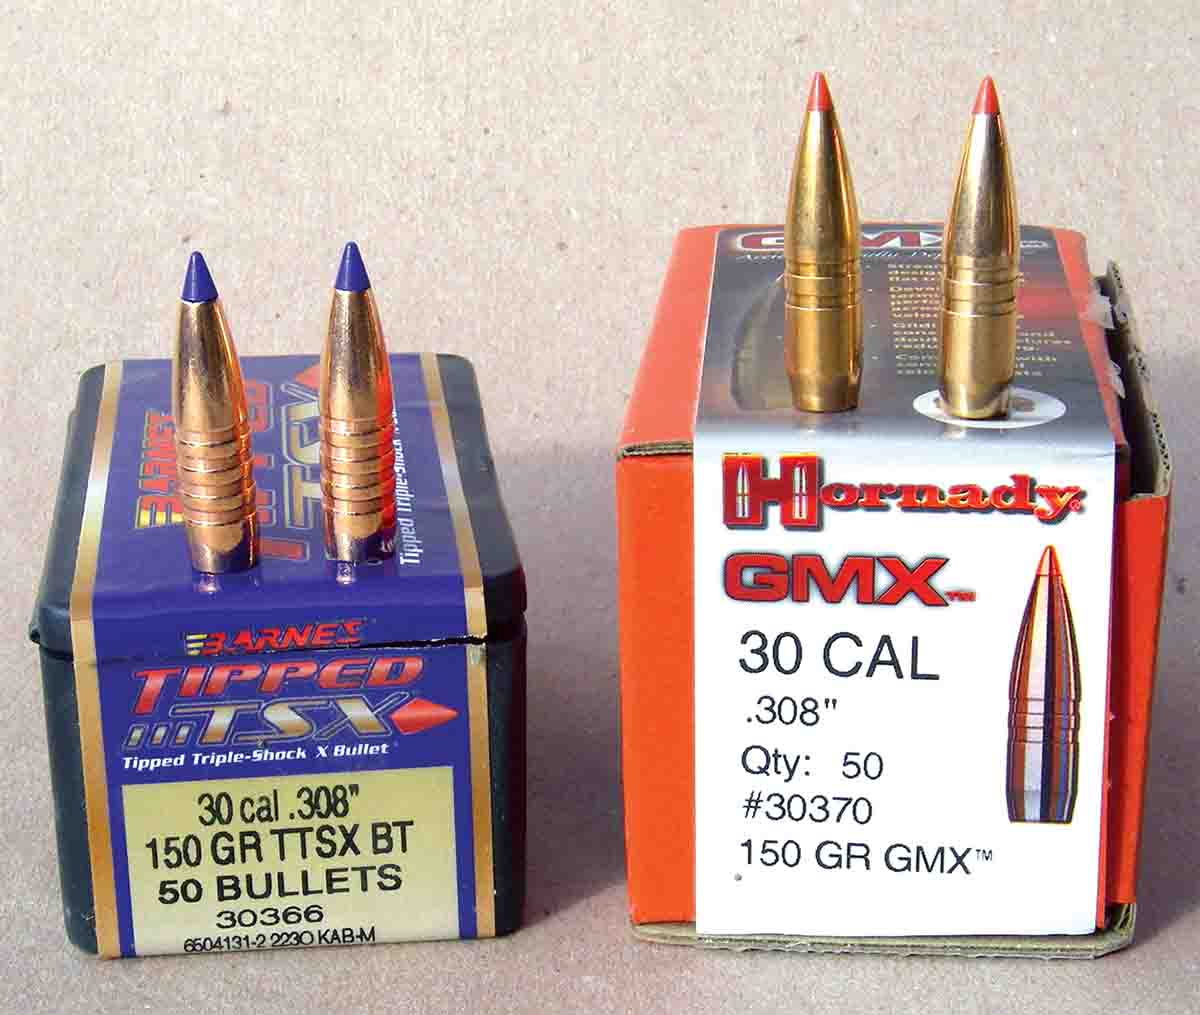 The Barnes Tipped Triple Shock X-Bullet and Hornady GMX solid copper expanding hunting bullets are popular in the .308 Winchester.